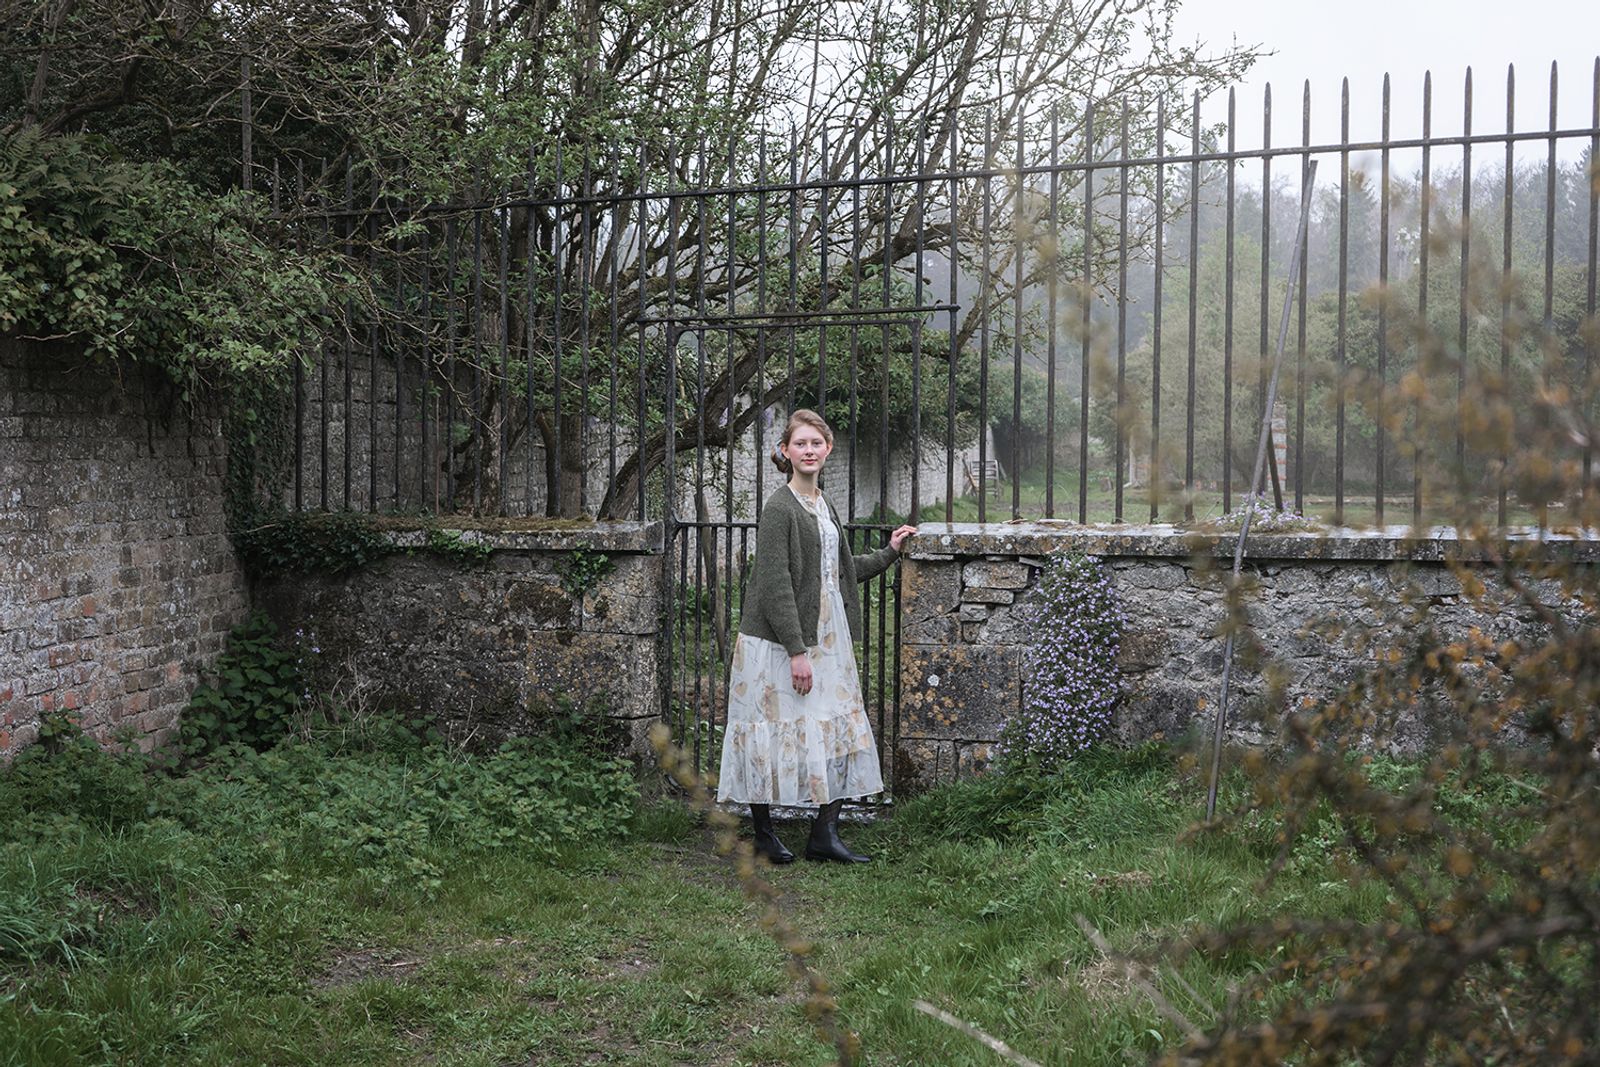 © Sussi Charlotte Alminde - Image from the The scent of Ireland photography project